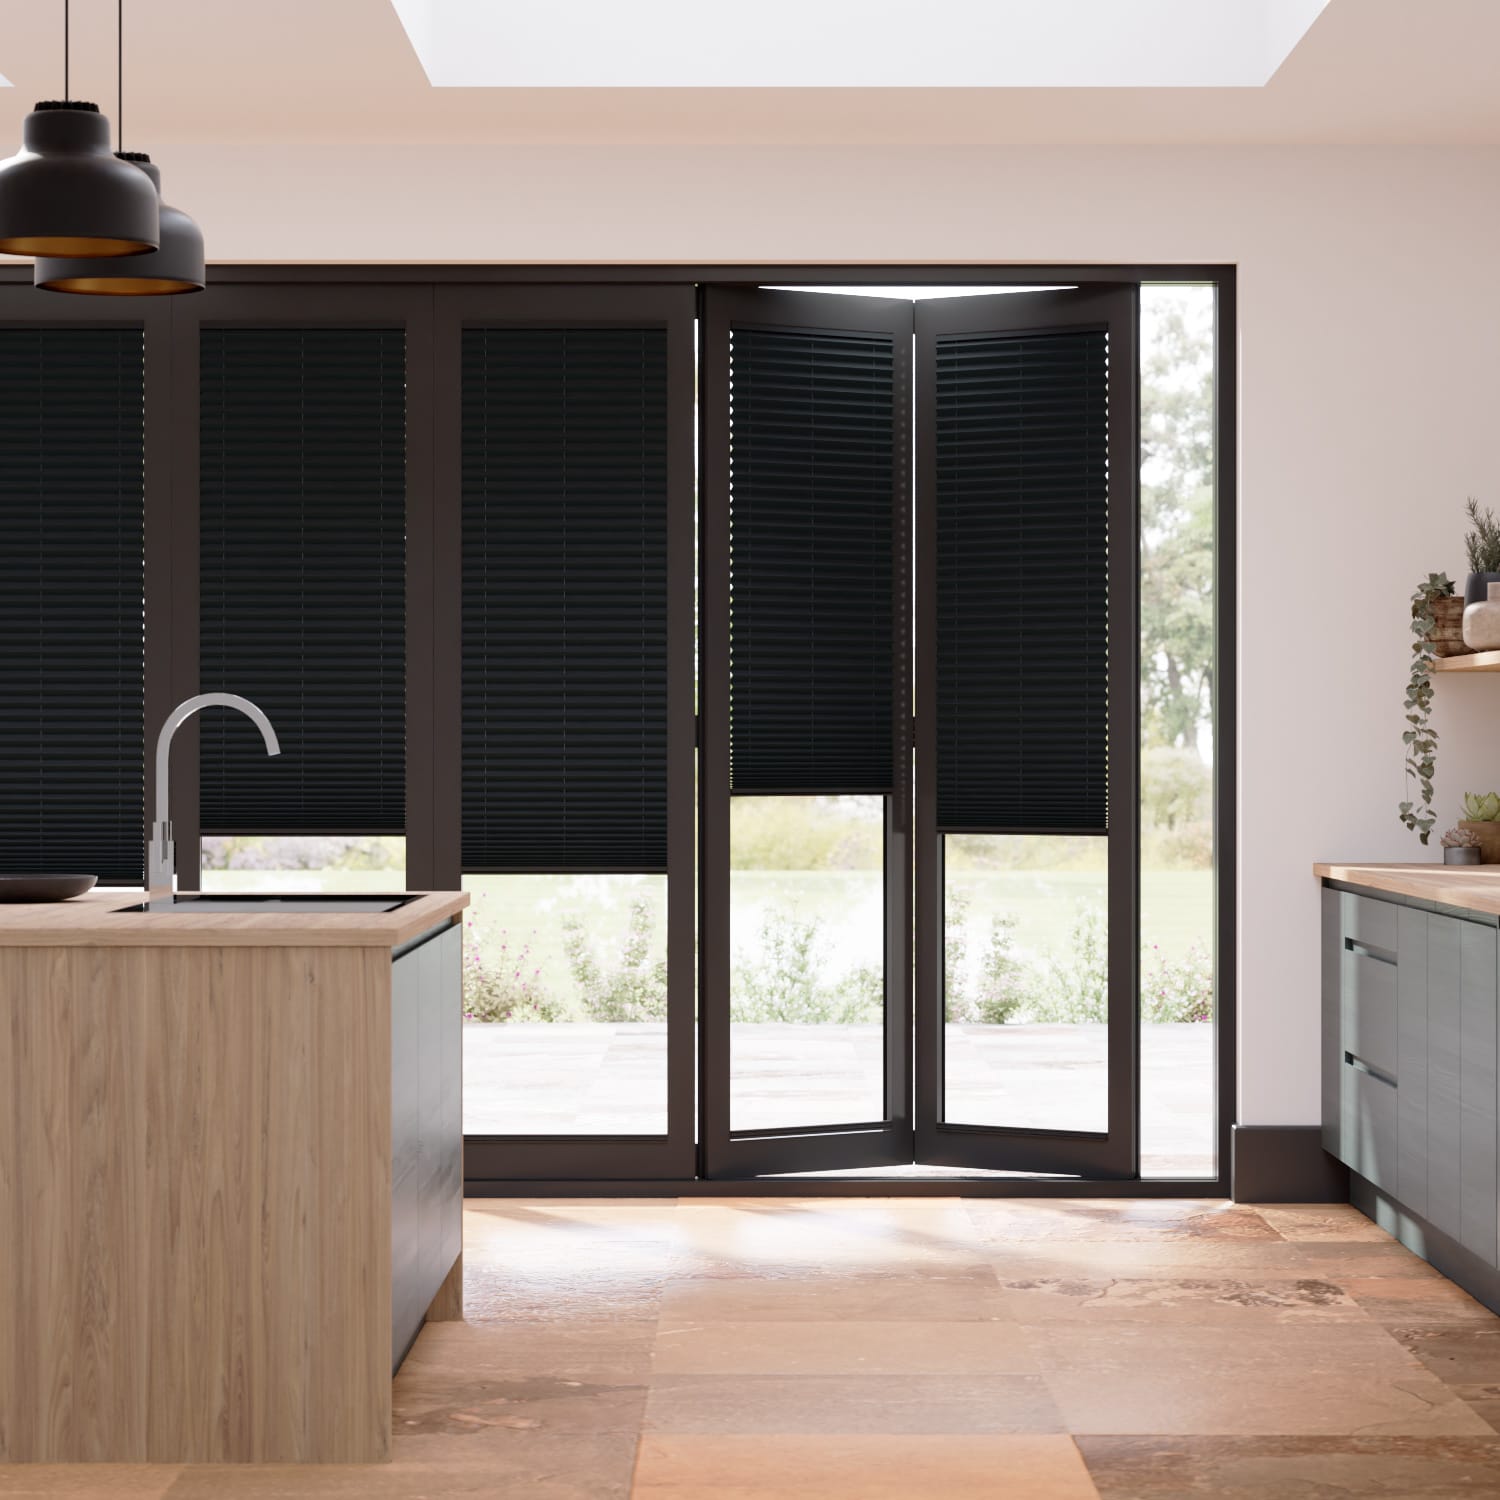 Blinds For Patio Doors Made To Measure, How Much Are Blinds For Patio Doors